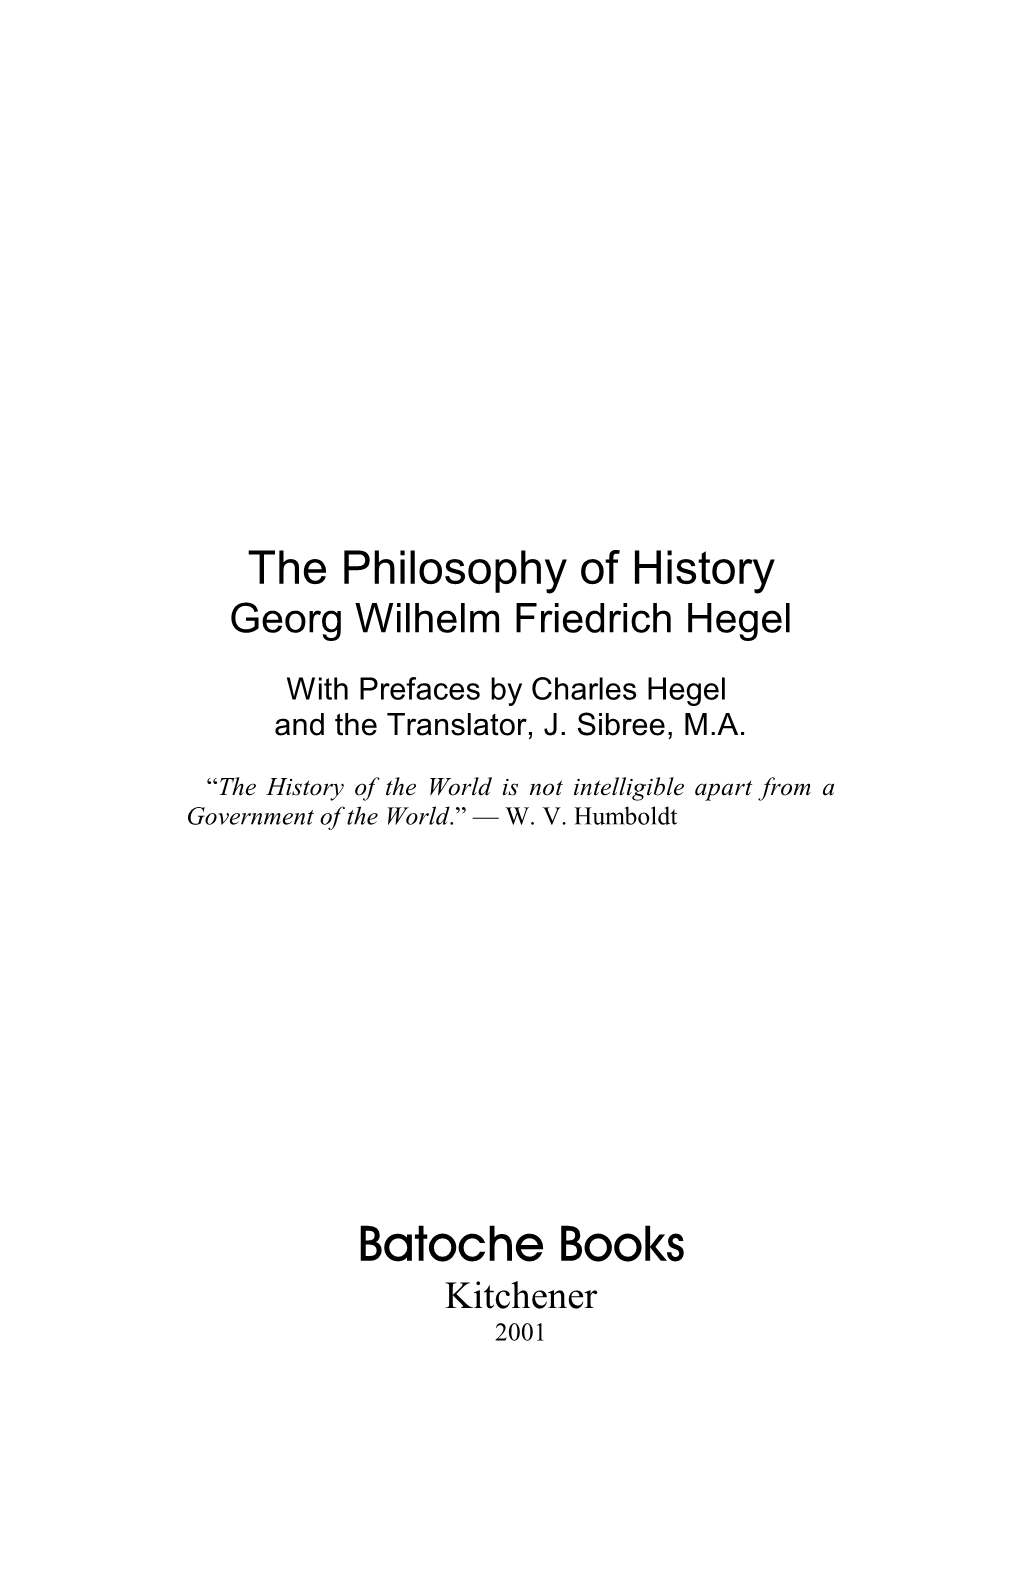 The Philosophy of History.Pdf